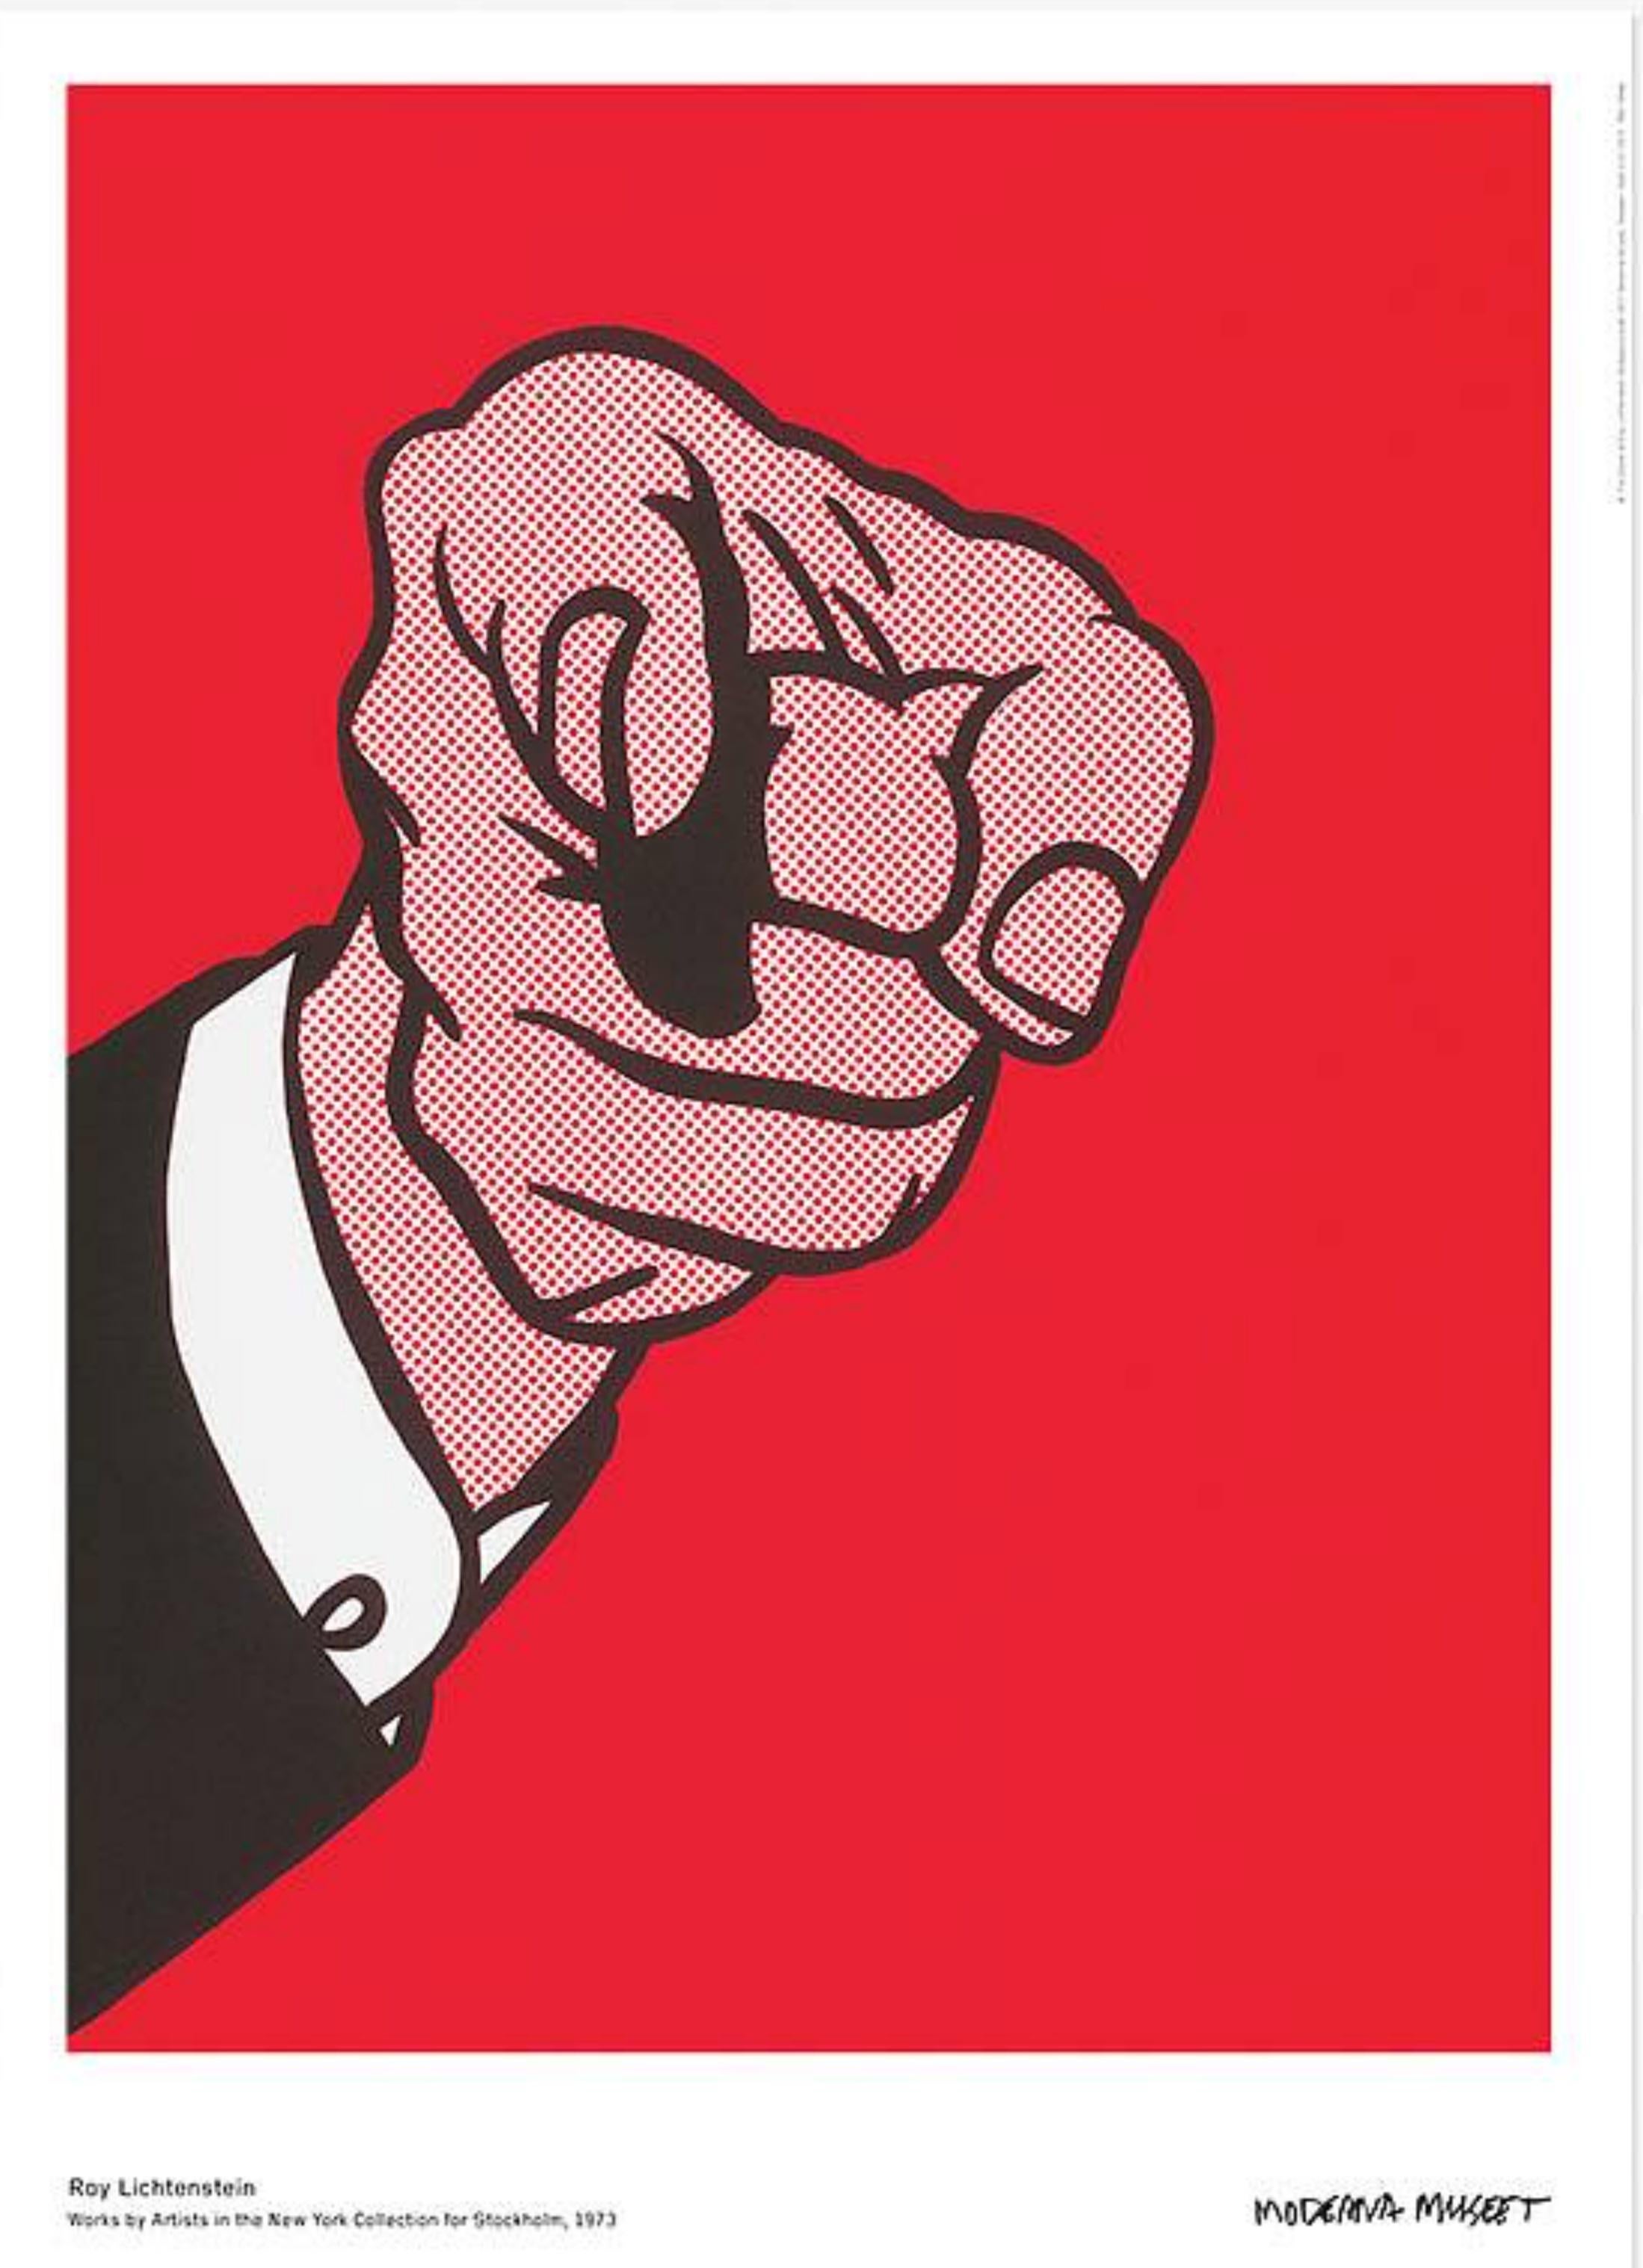 Roy Lichtenstein Figurative Print - Finger Pointing, Works by Artists in the New York Collection for Stockholm, 1973